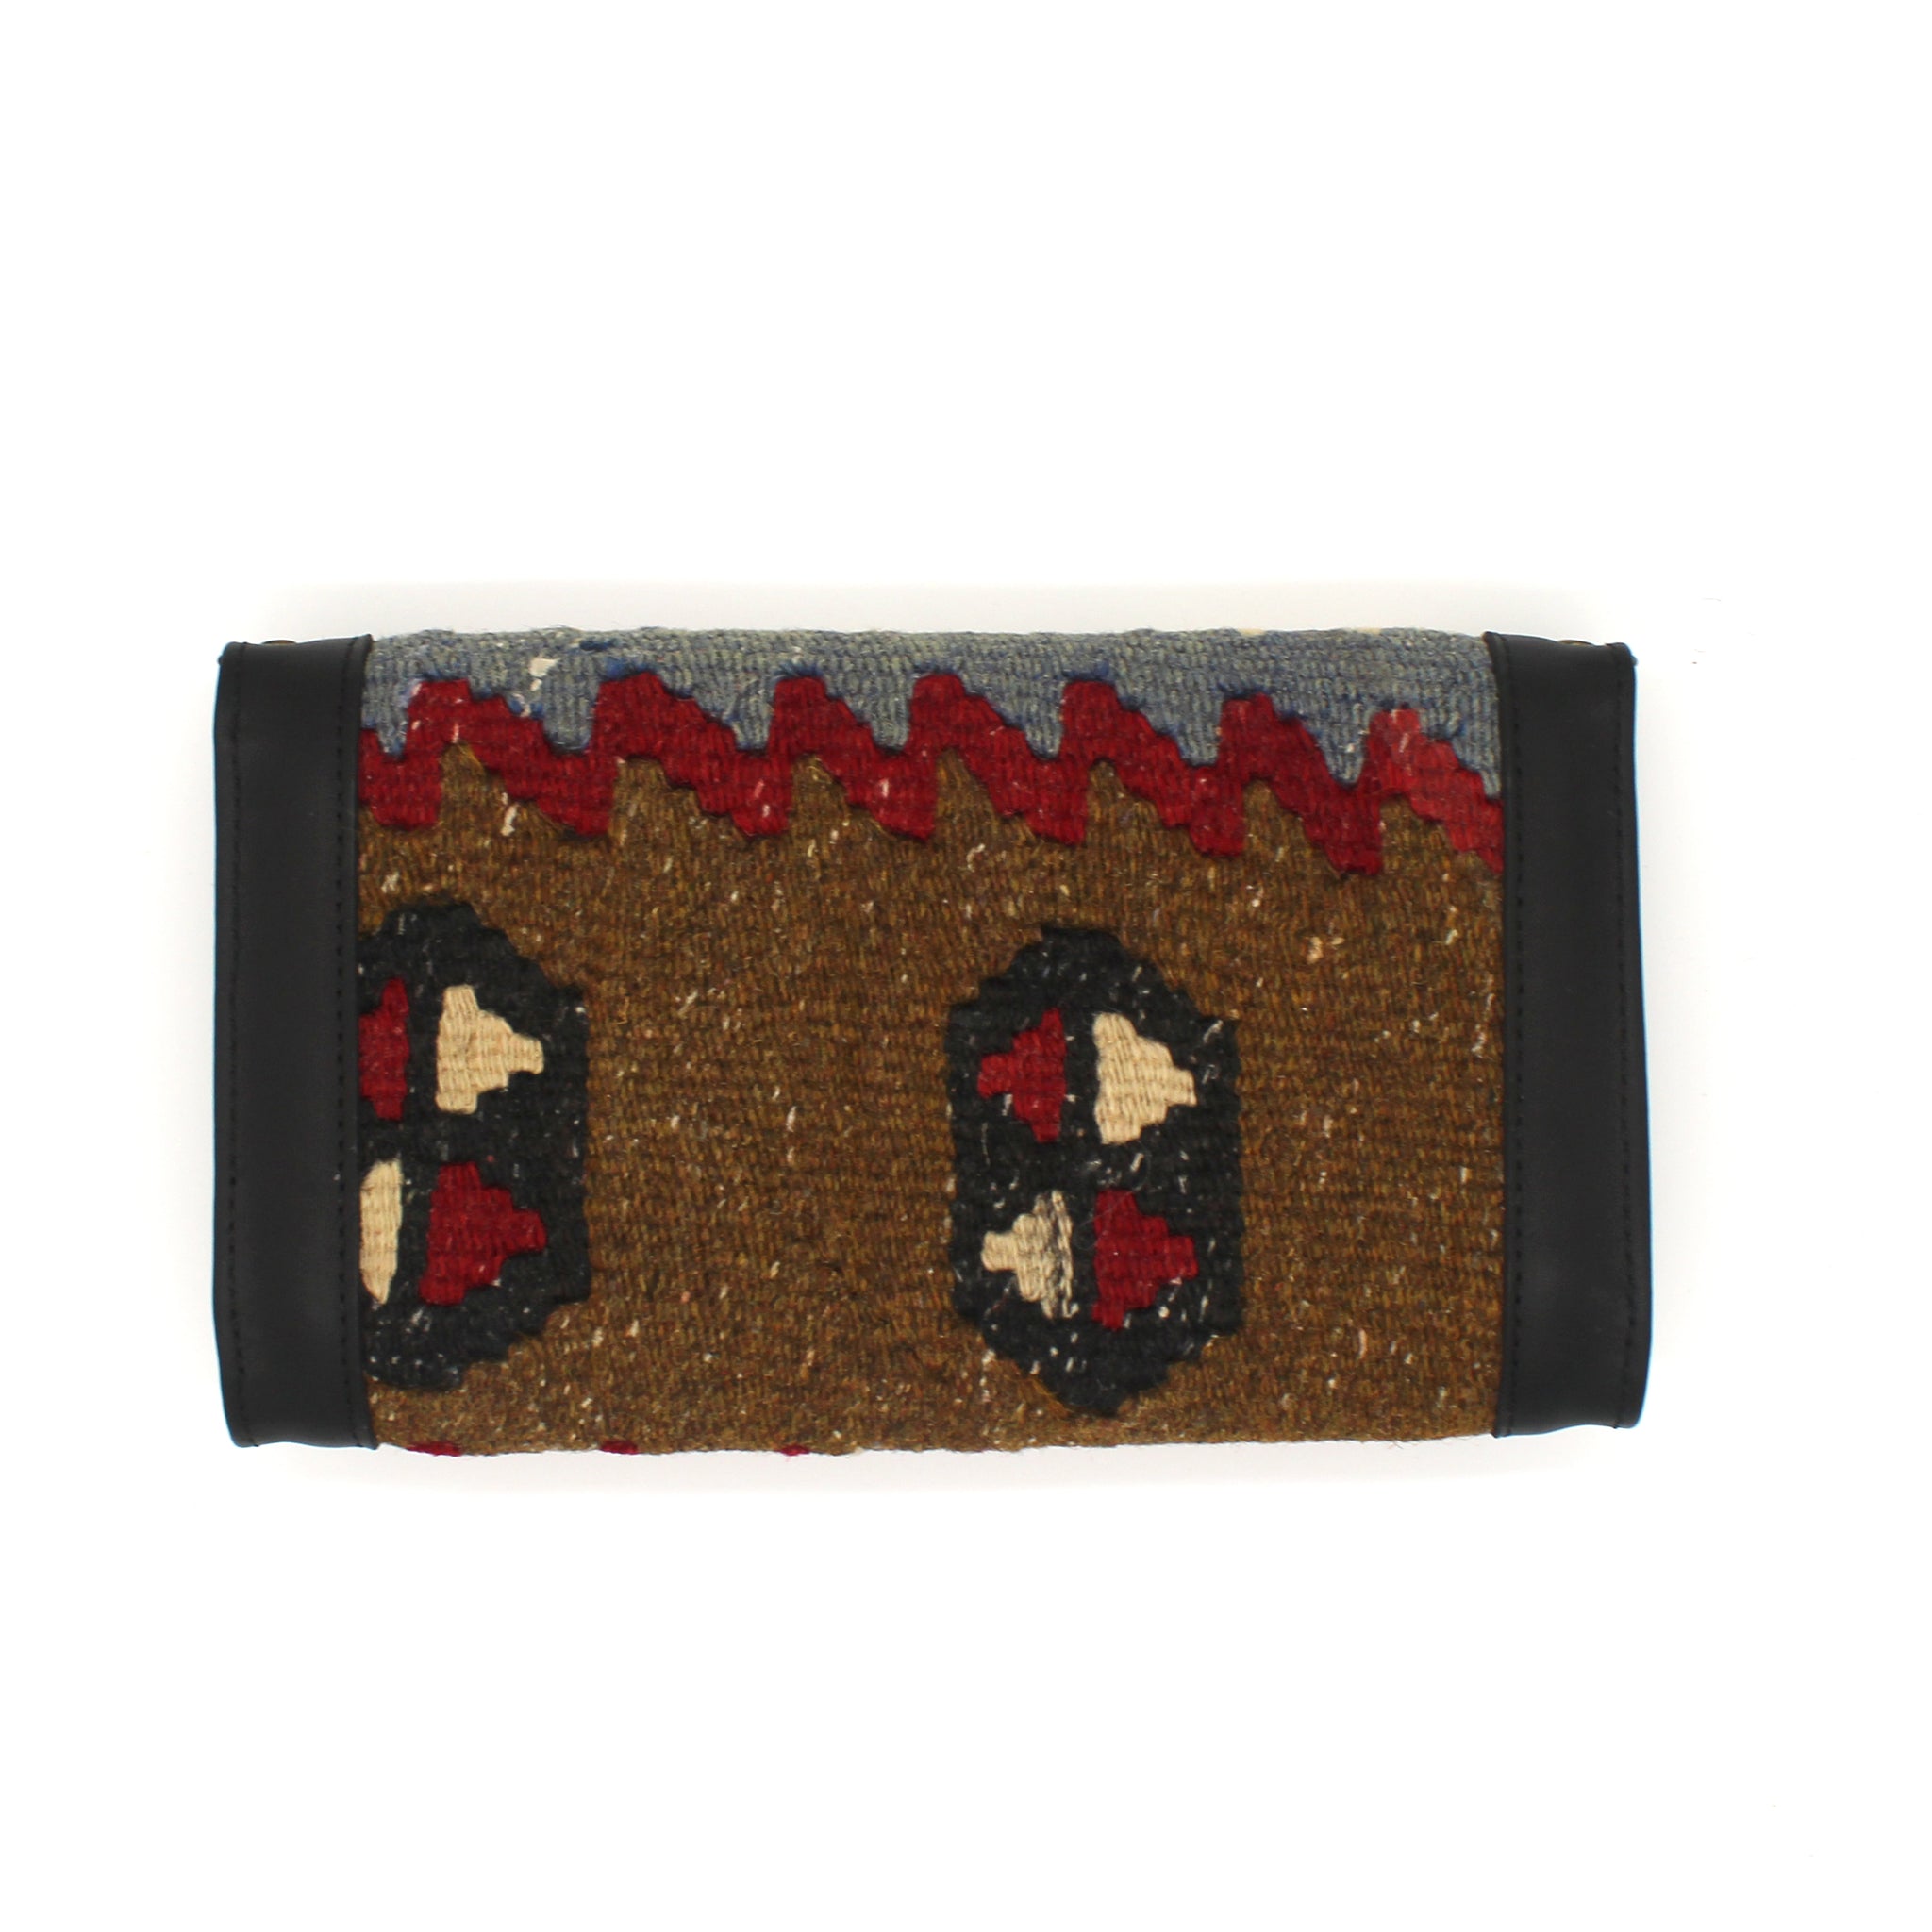 Vintage Rug and Leather Wallet with Strap No. 2